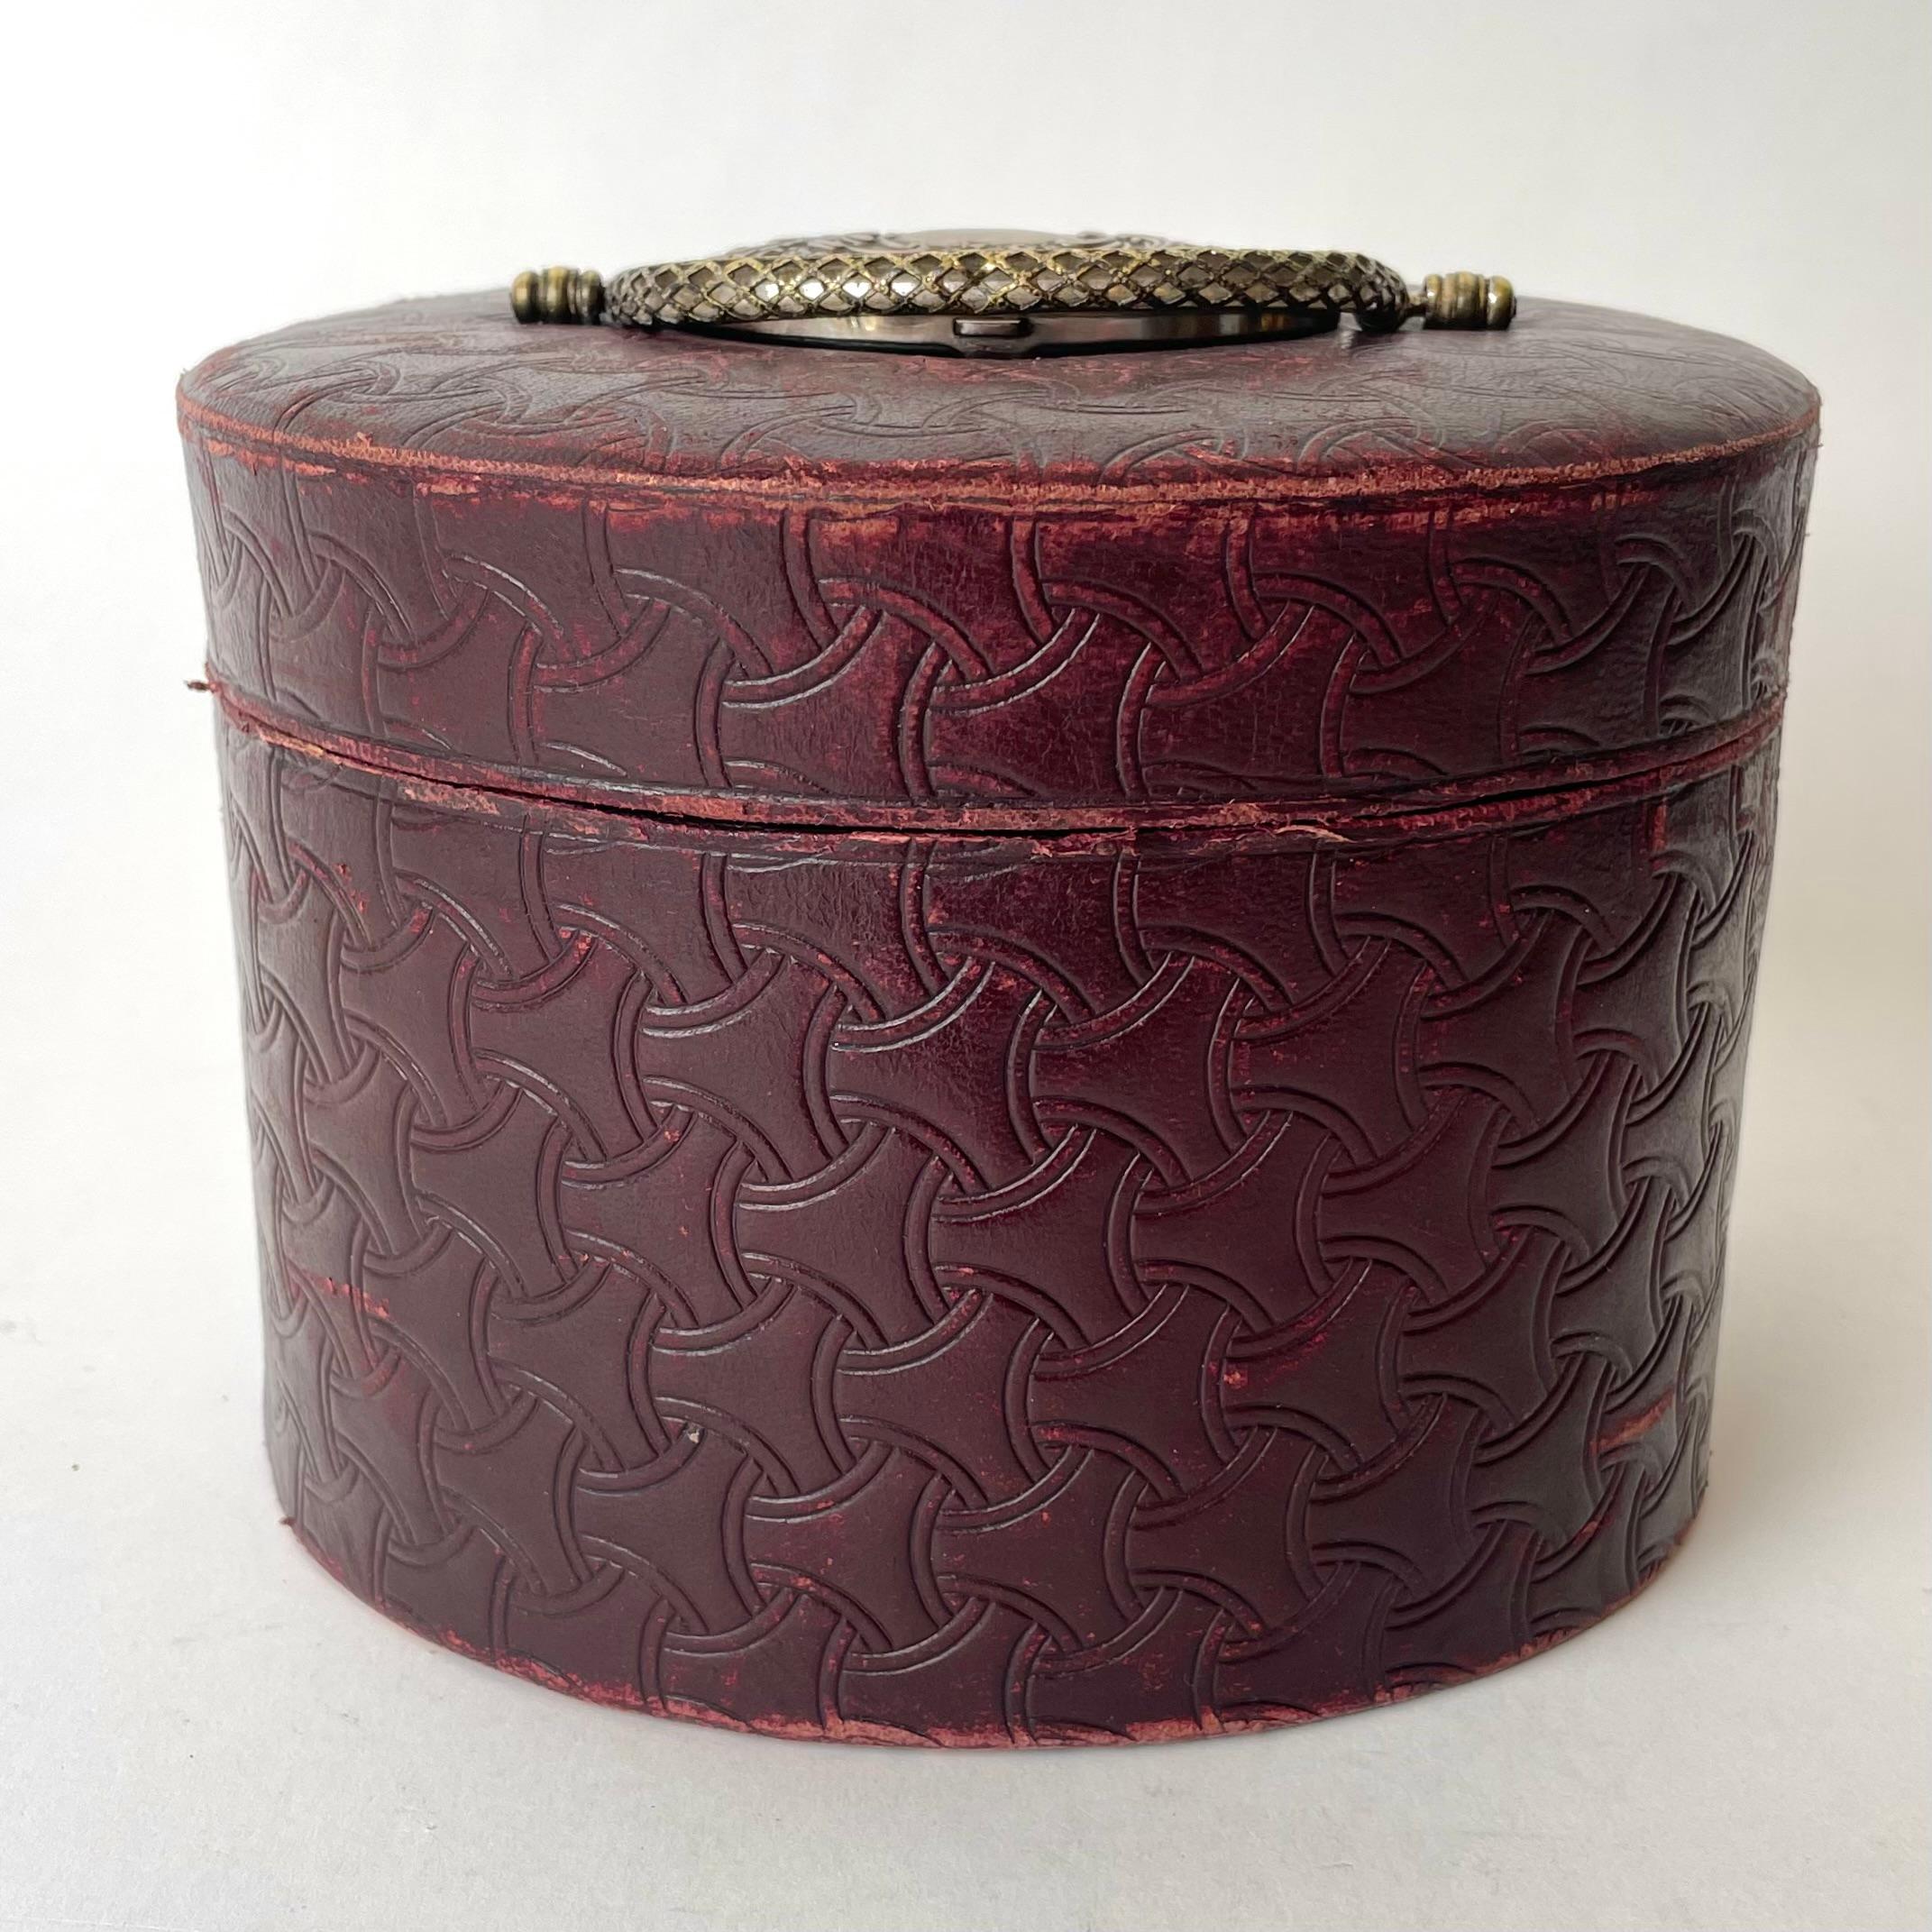 European Late 19th Century Collar Box, Leather and Silver Plated Metal, Silk Lined For Sale